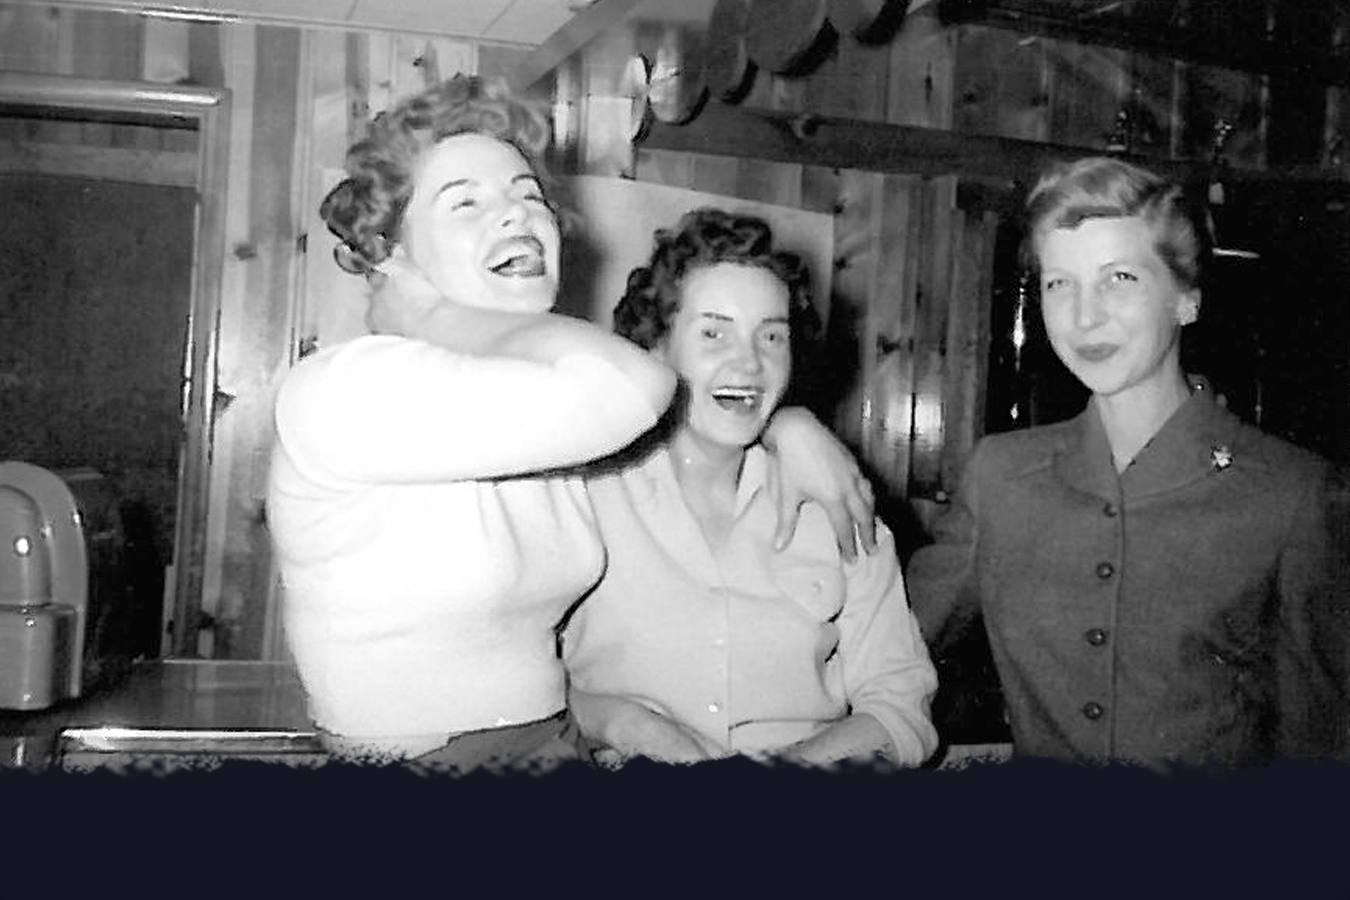  Wednesdays have always been Ladies Day at the Club. And, no, the one on the left is not Marilyn Monroe. 